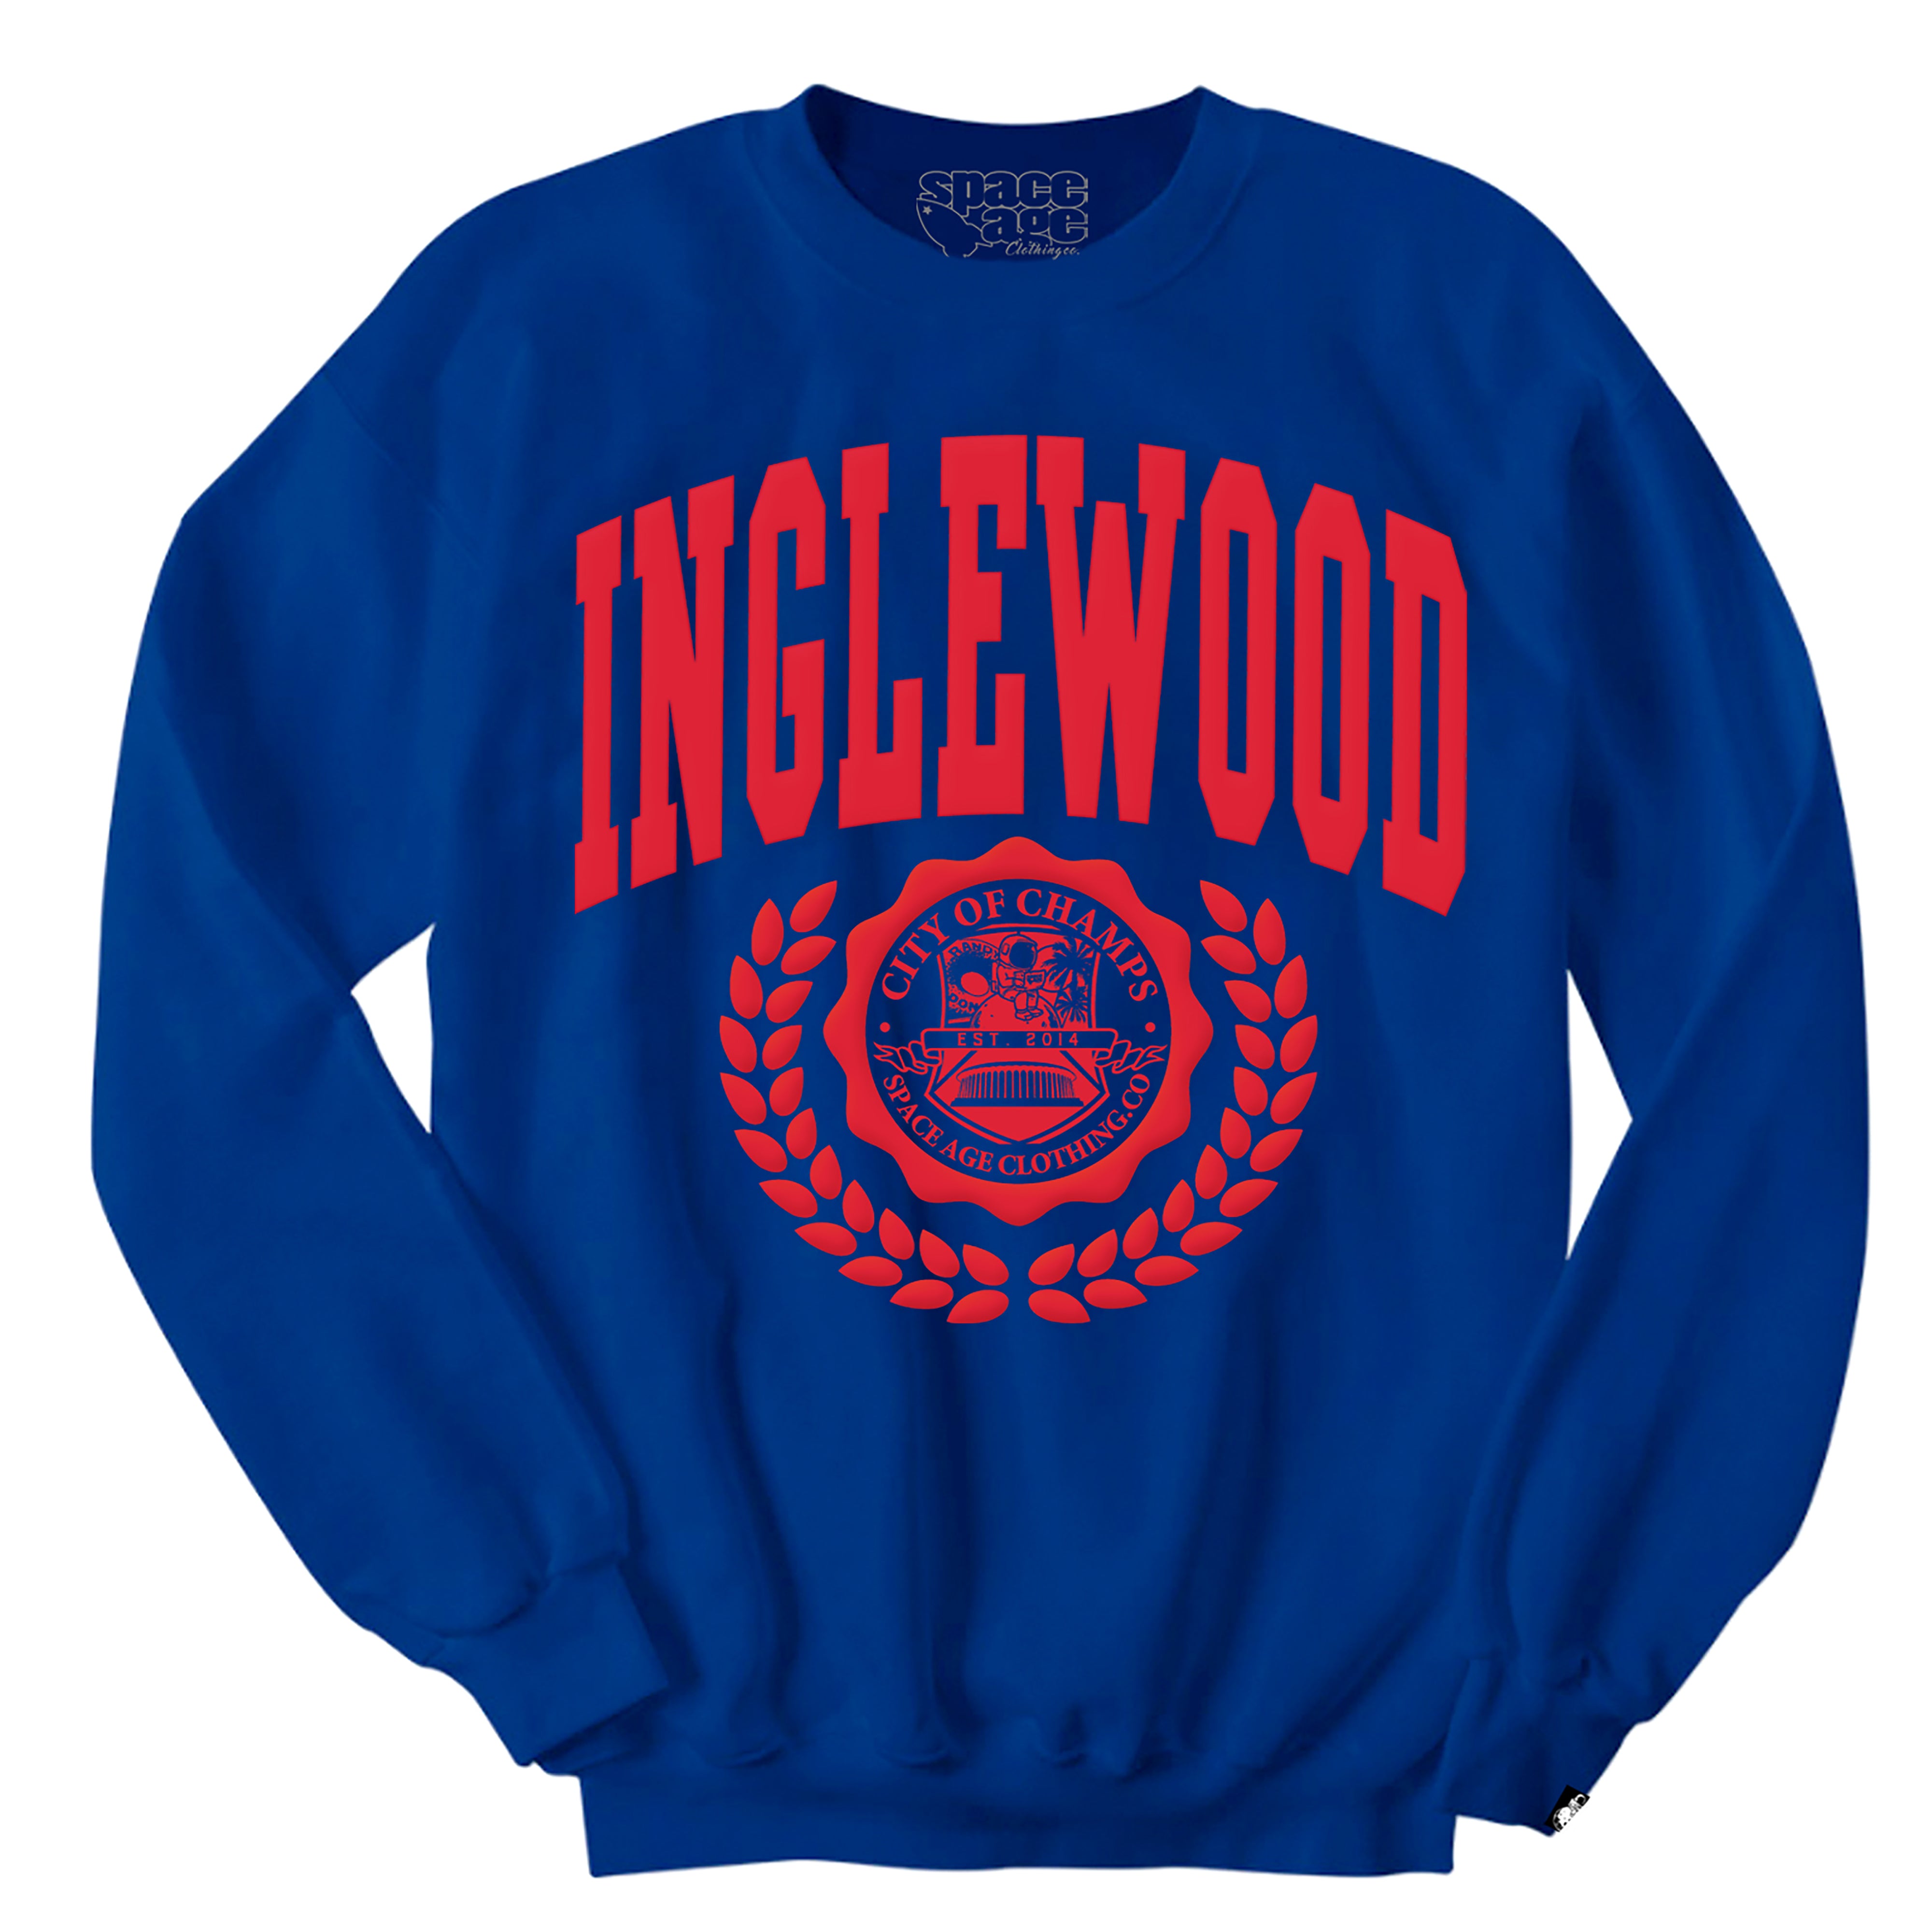 INGLEWOOD X SPACE AGE ROYAL LIMITED EDITION